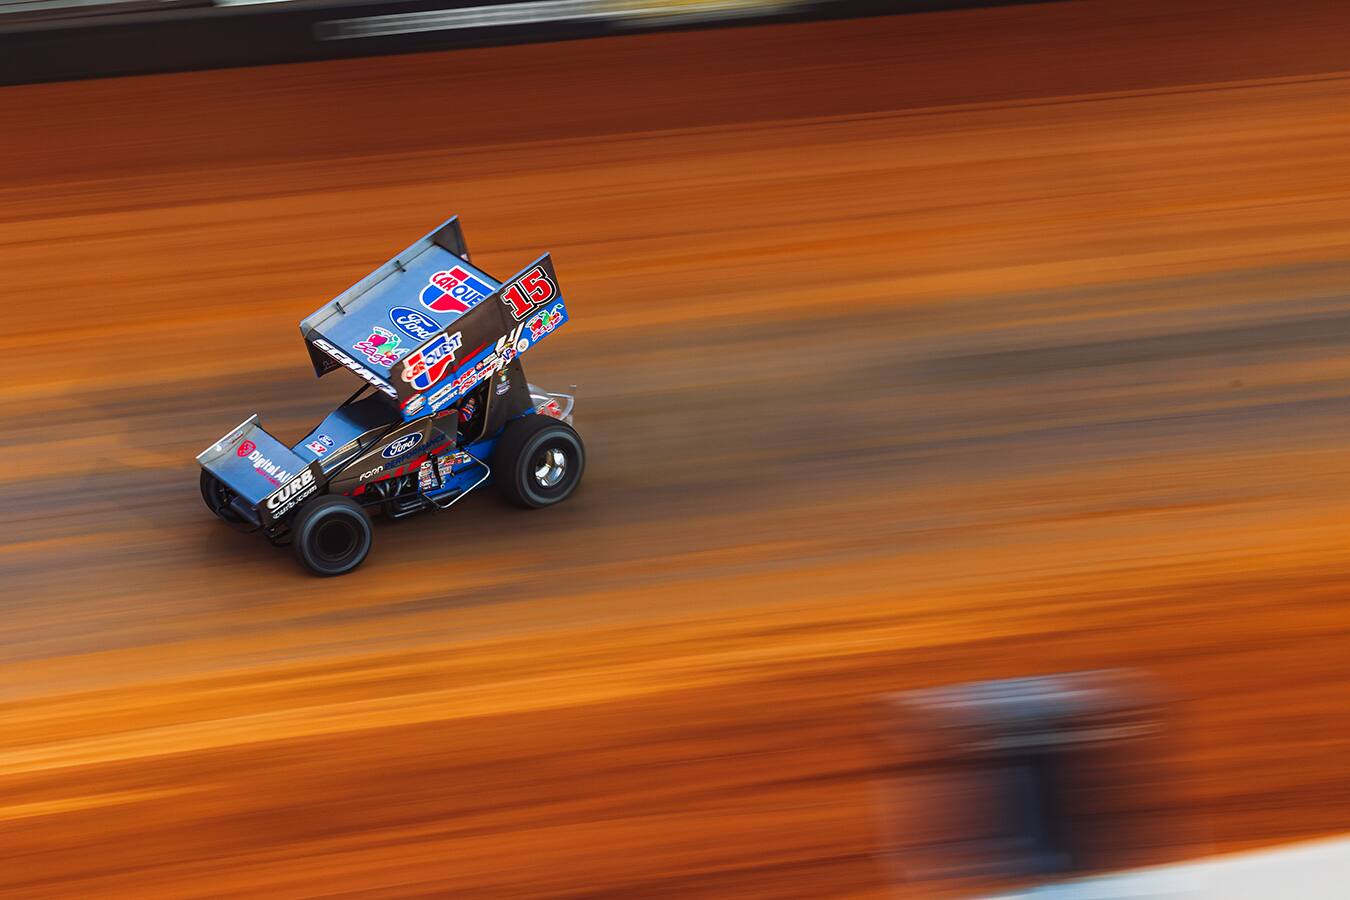 In World of Outlaws at Bristol, Donny Schatz finished fifth on Friday and second on Sunday.